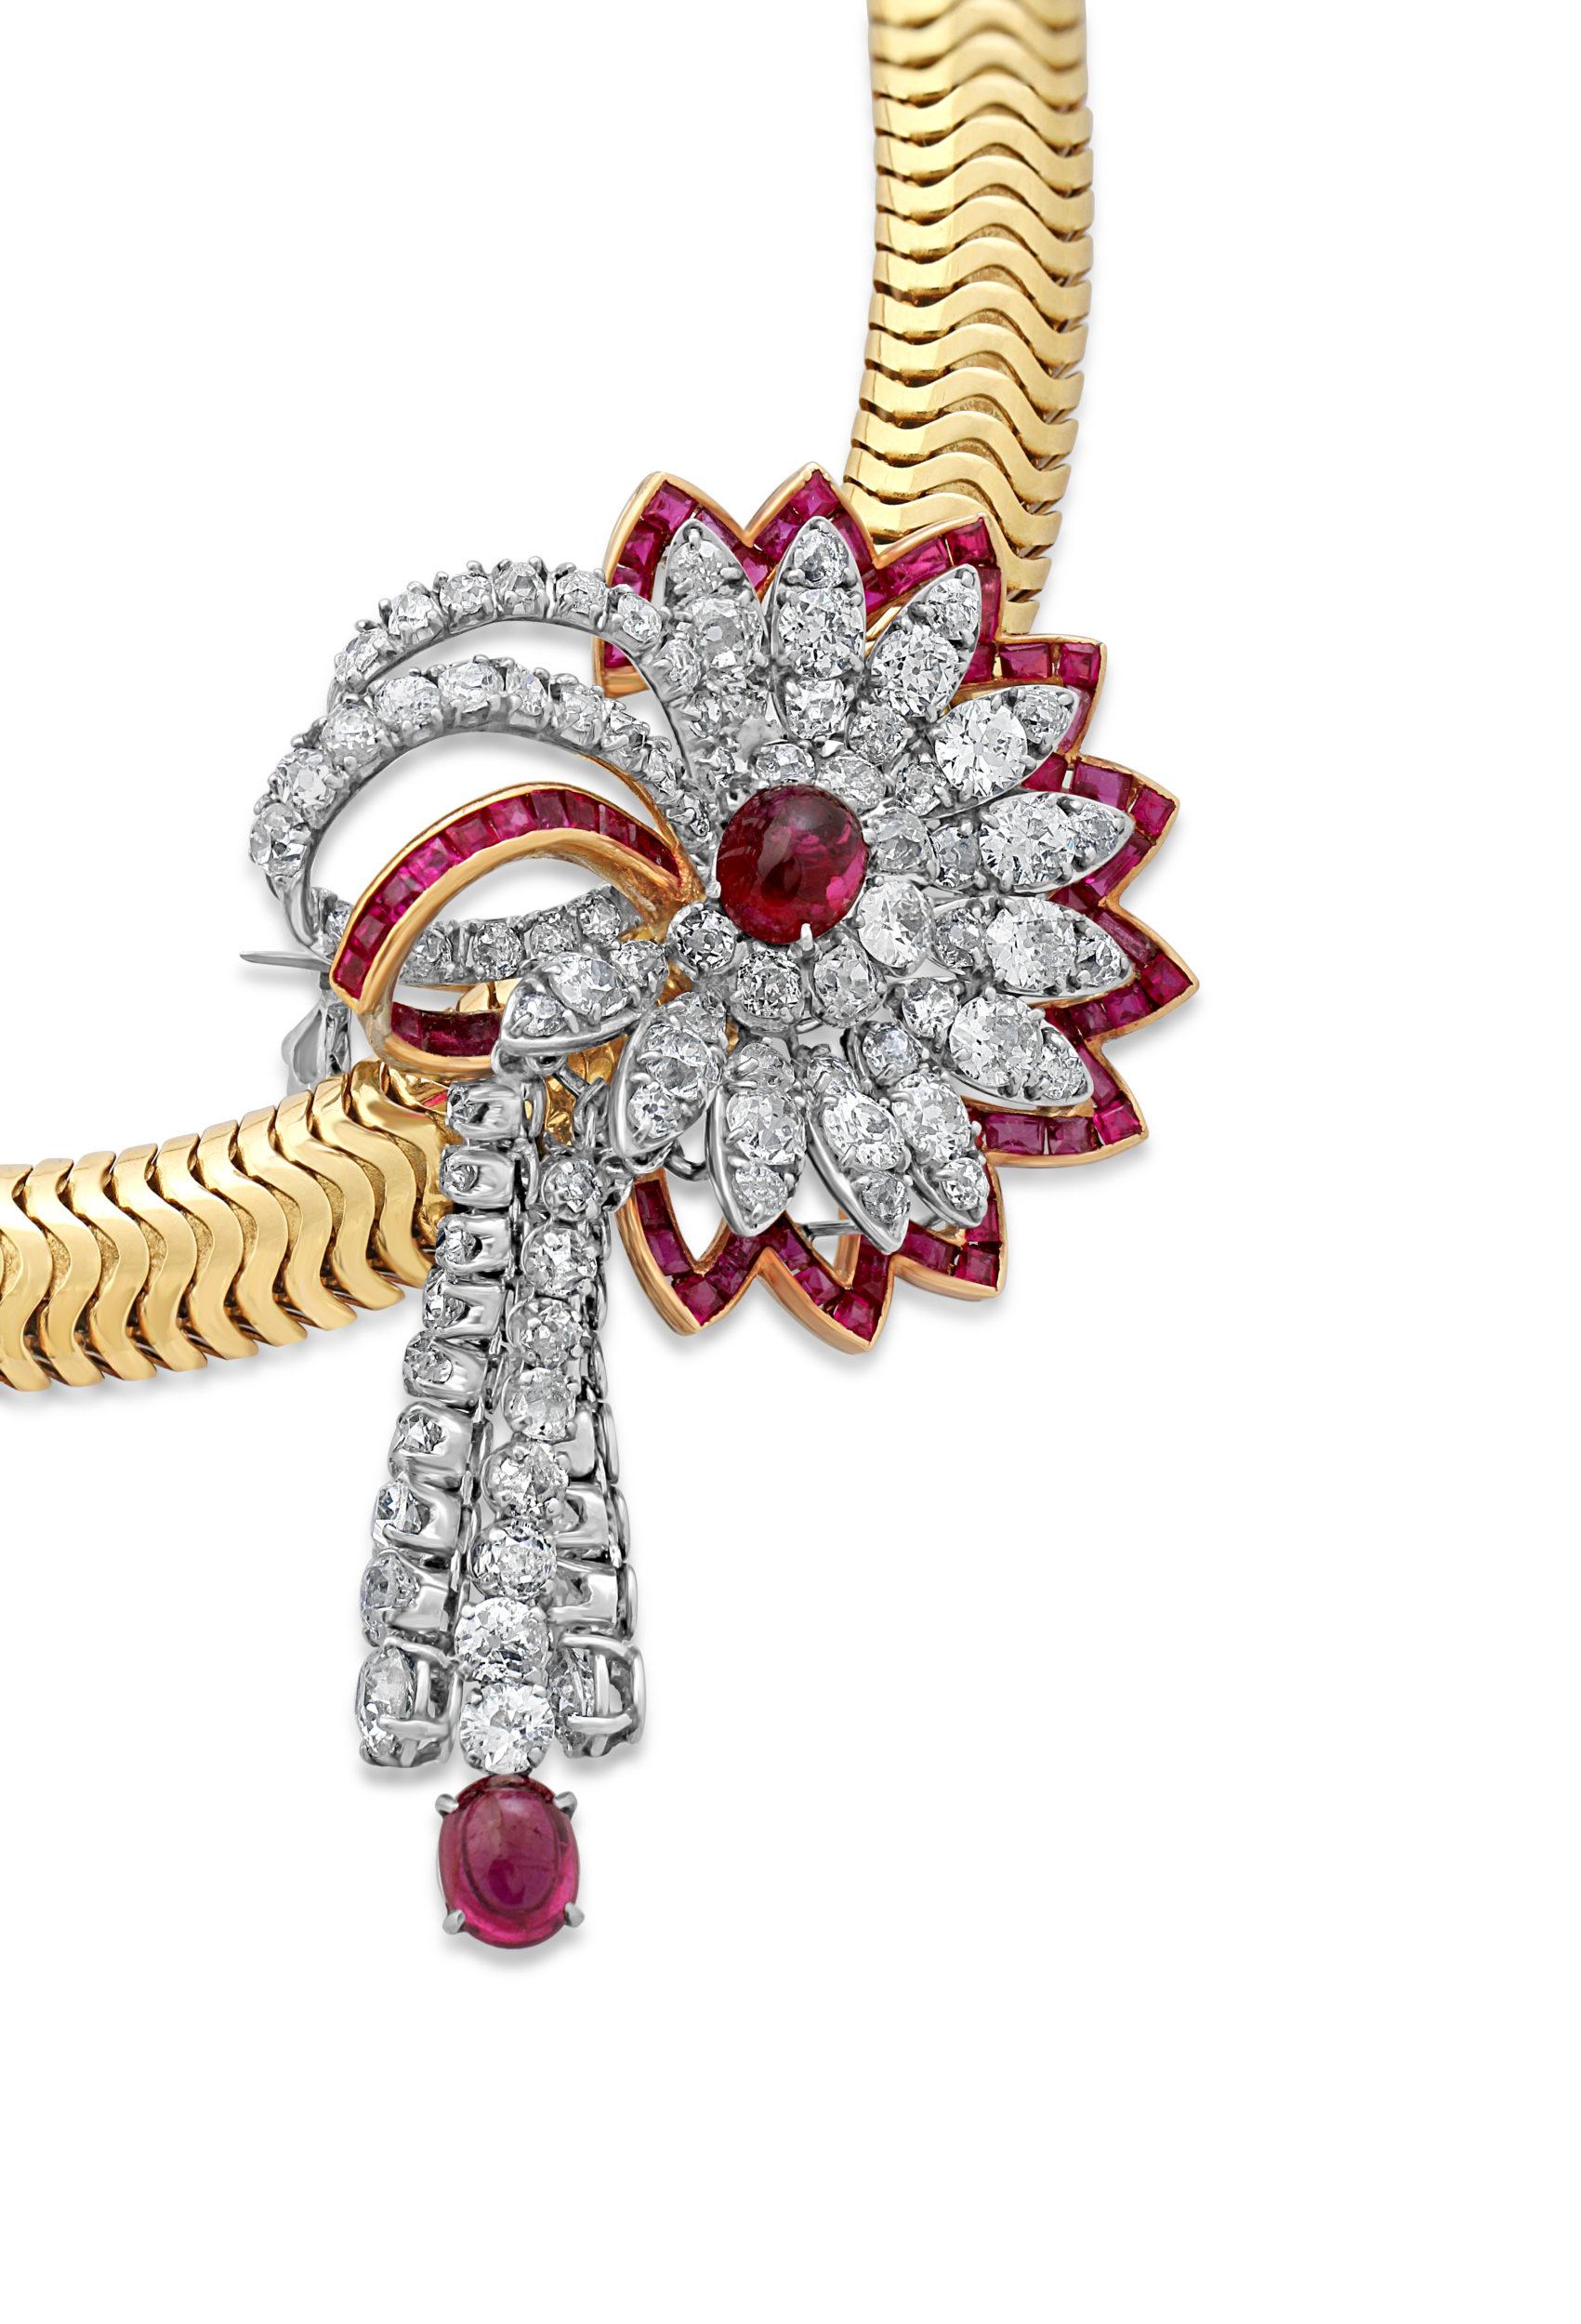 An 18k gold tubogas necklace with a detachable brooch fitting. The brooch is crafted from platinum and set with diamonds and cabochon rubies in a floral design. Circa 1940s.